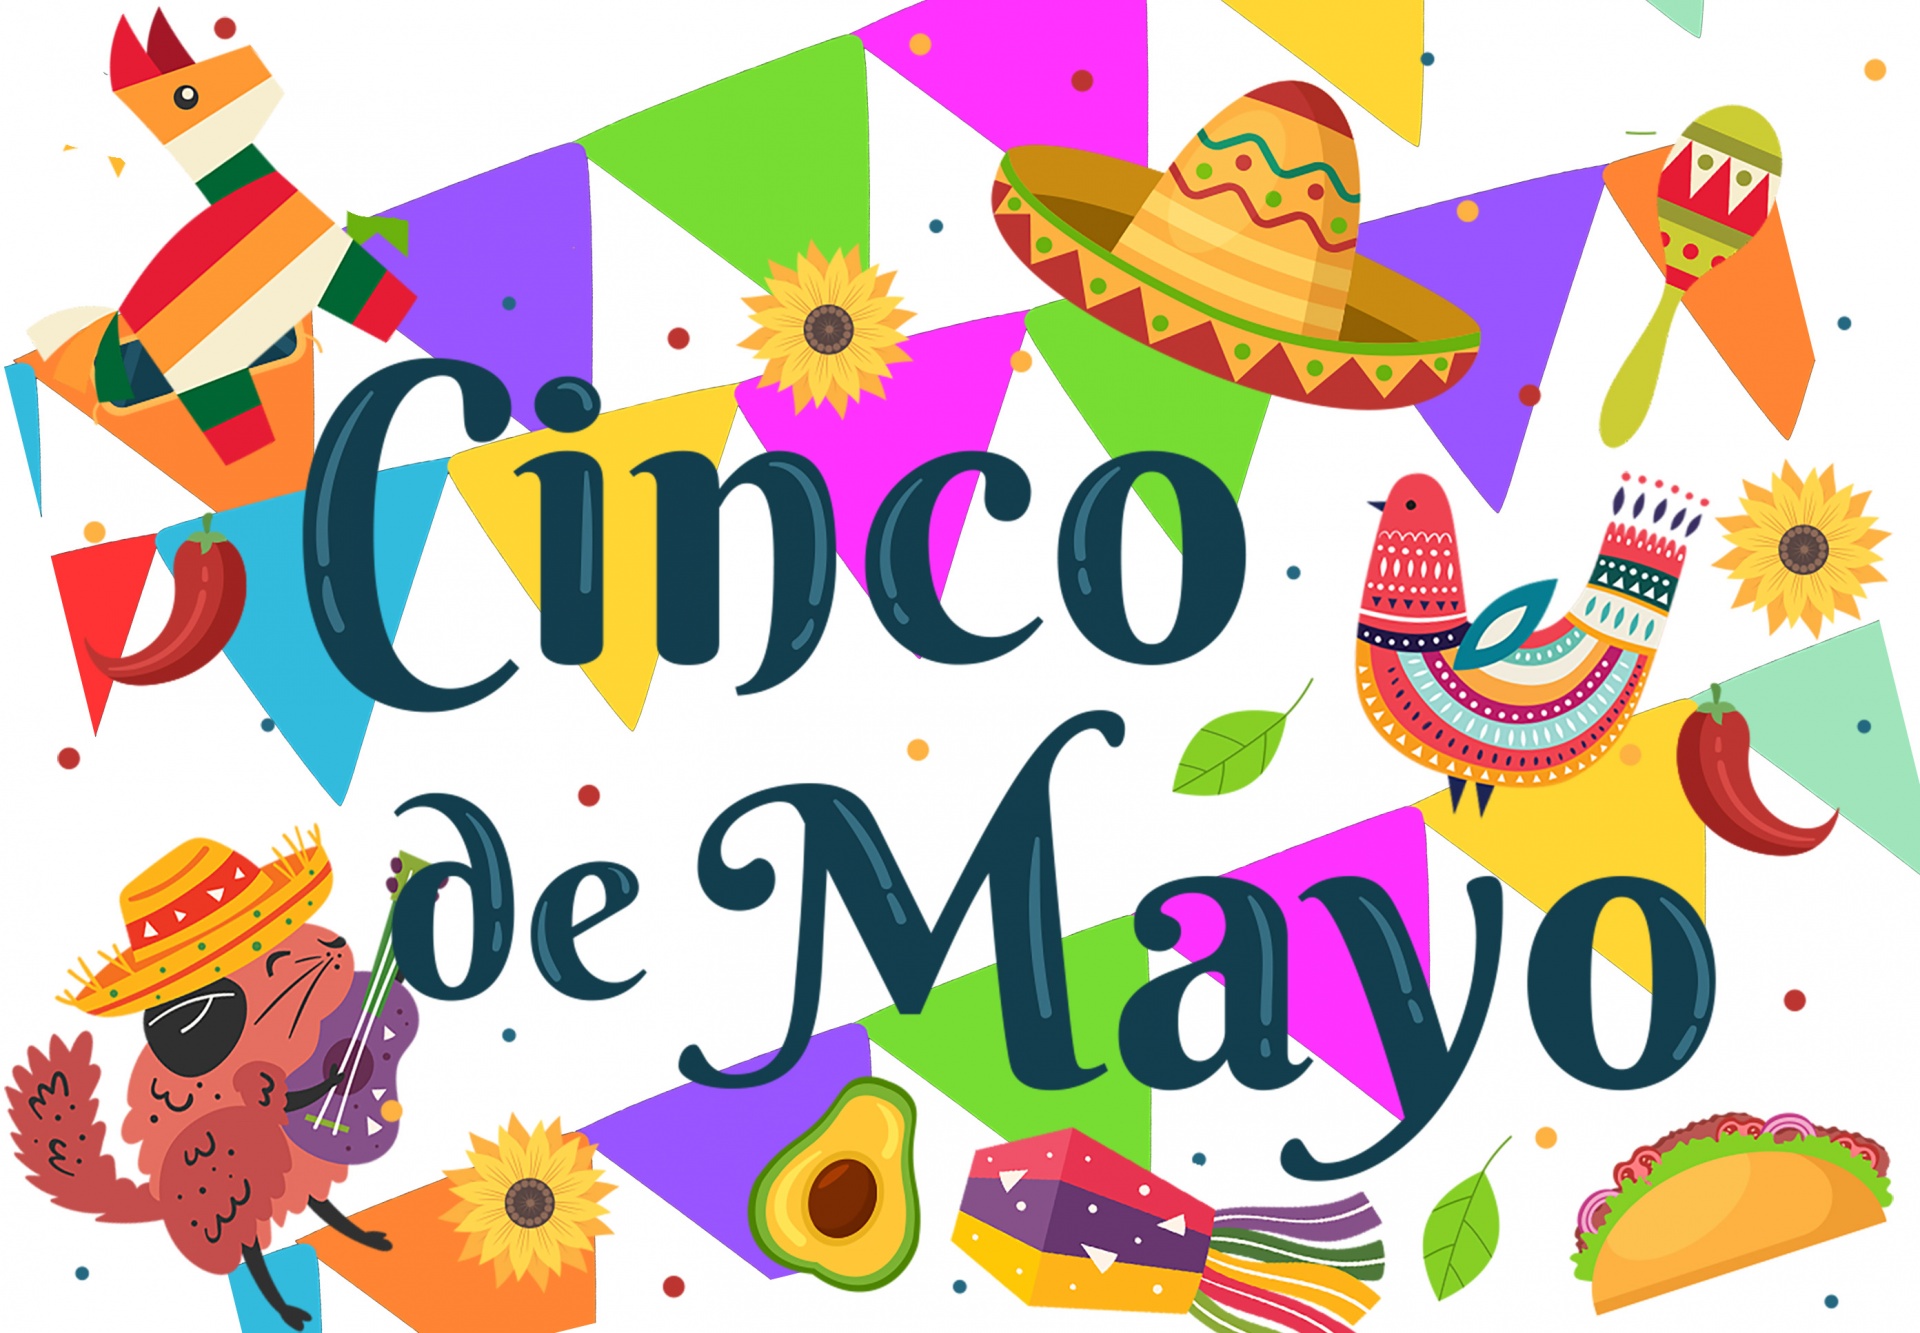 colorful poster featuring various icons for Cinco de Mayo